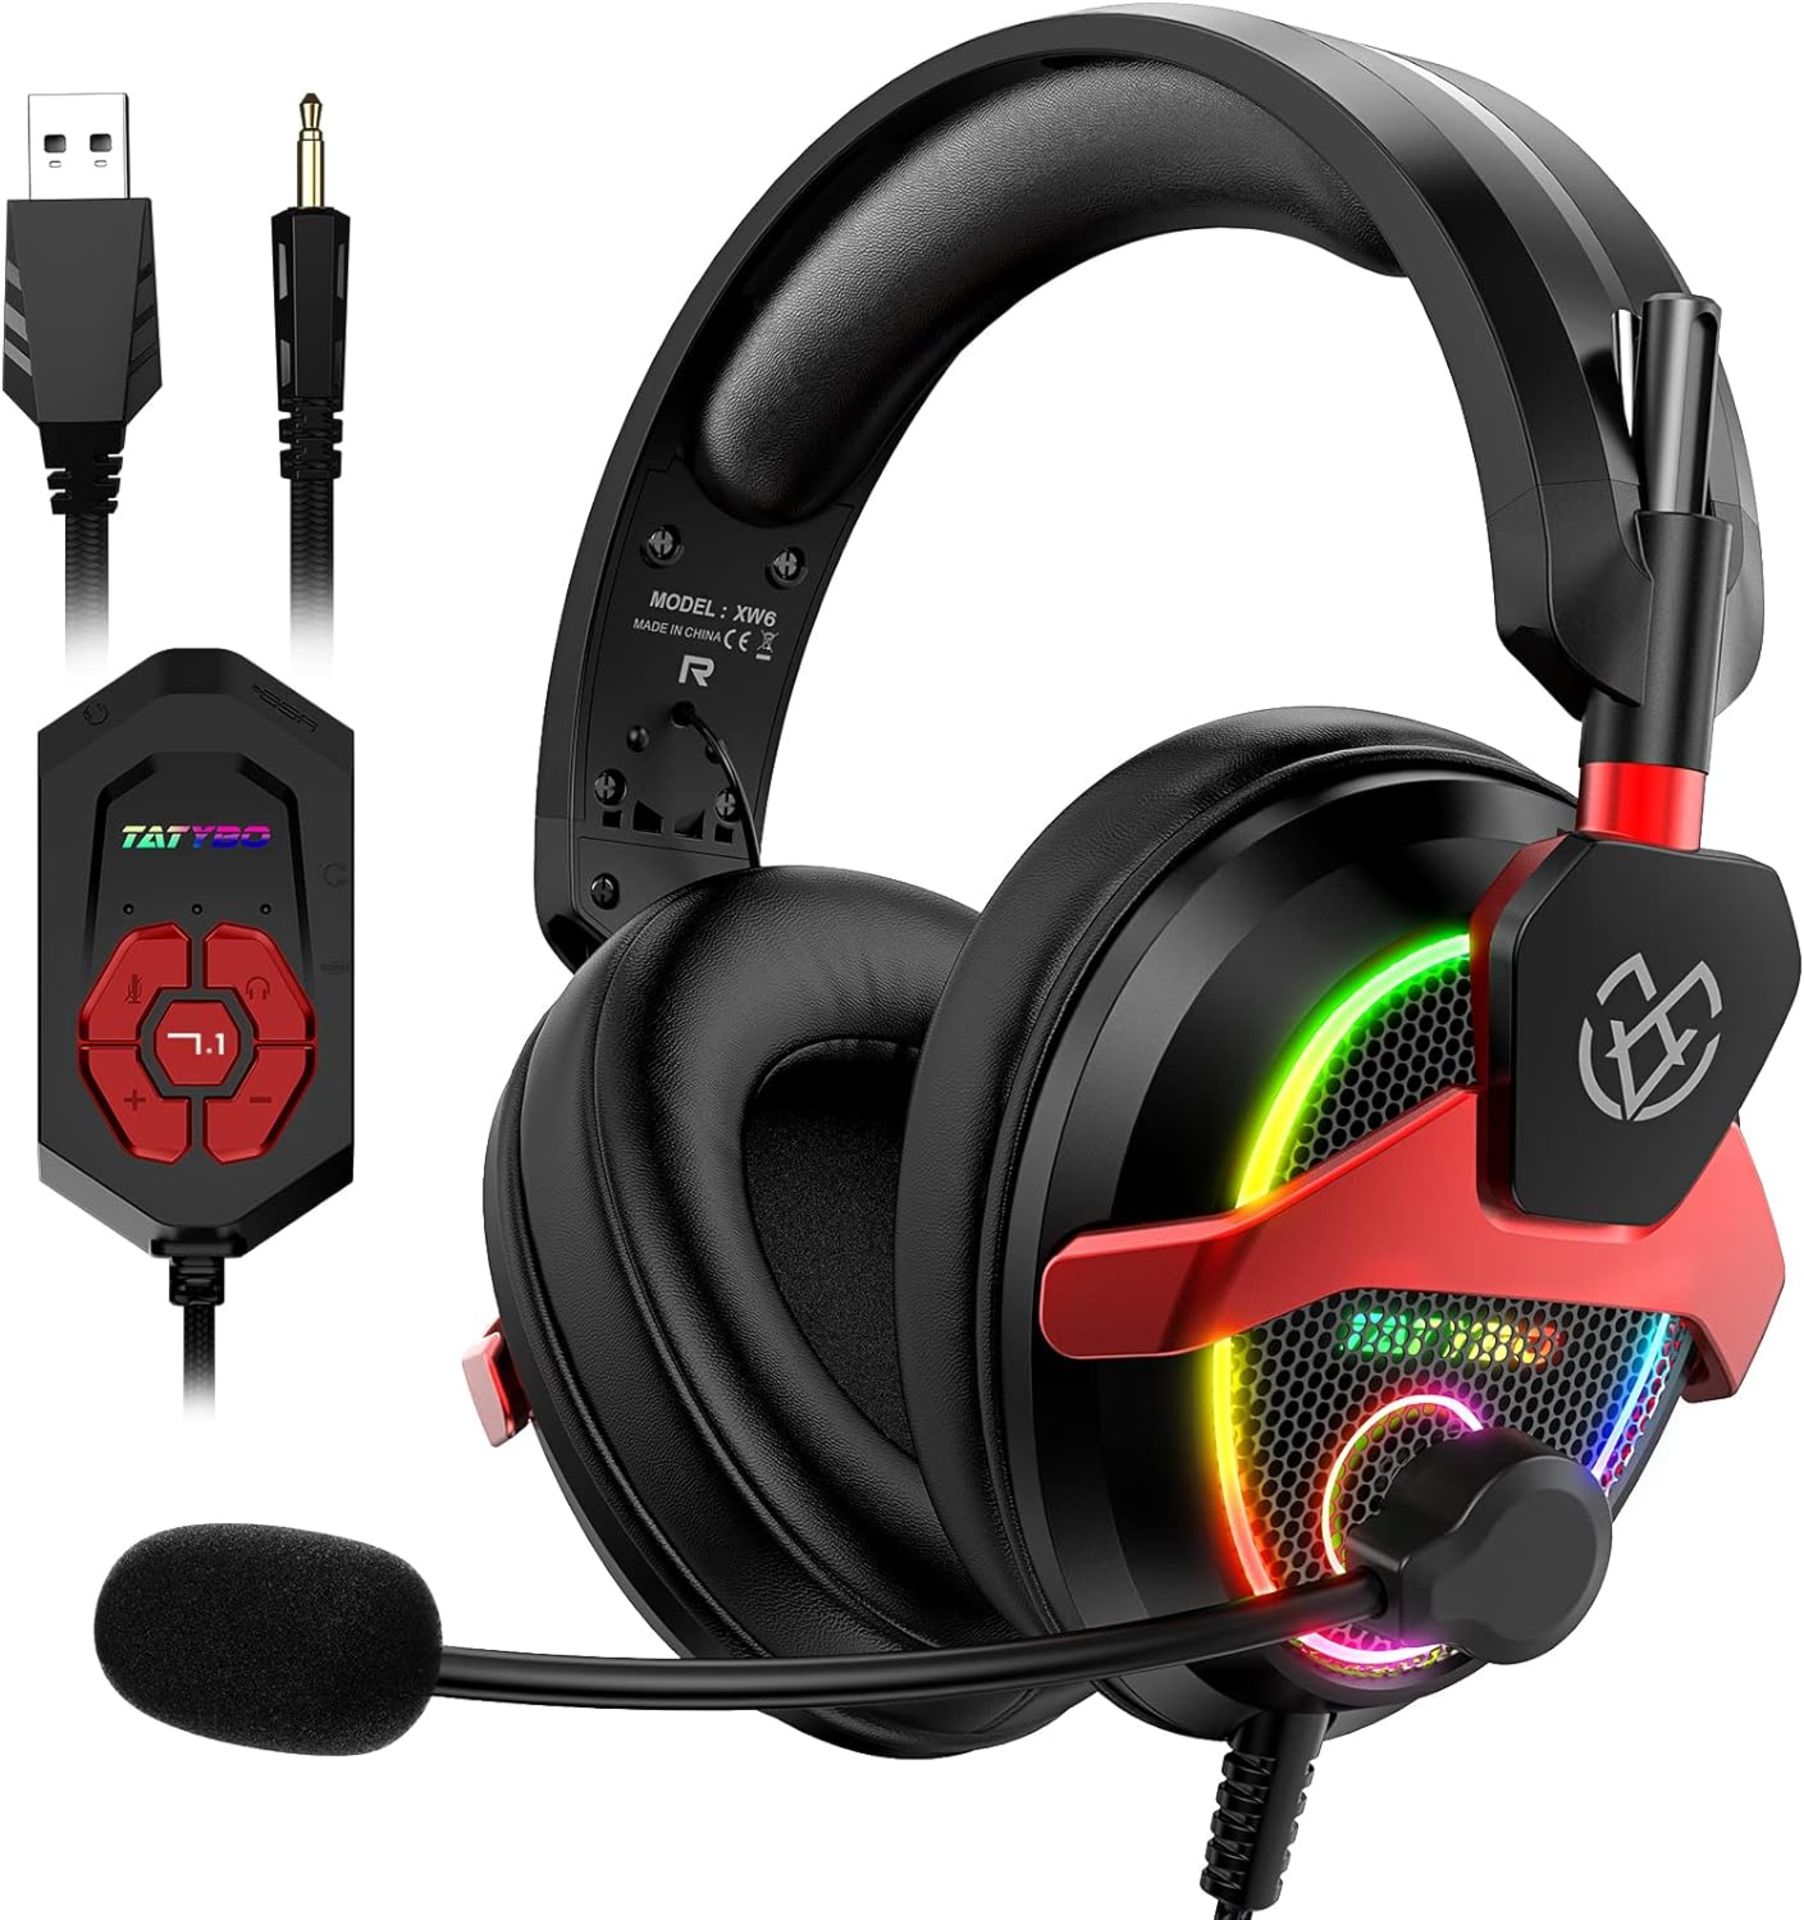 Tatybo XW6 7.1 Gaming Headset for PC, PS4, PS5, Xbox One, Switch, USB & 3.5mm Gaming Headphones with